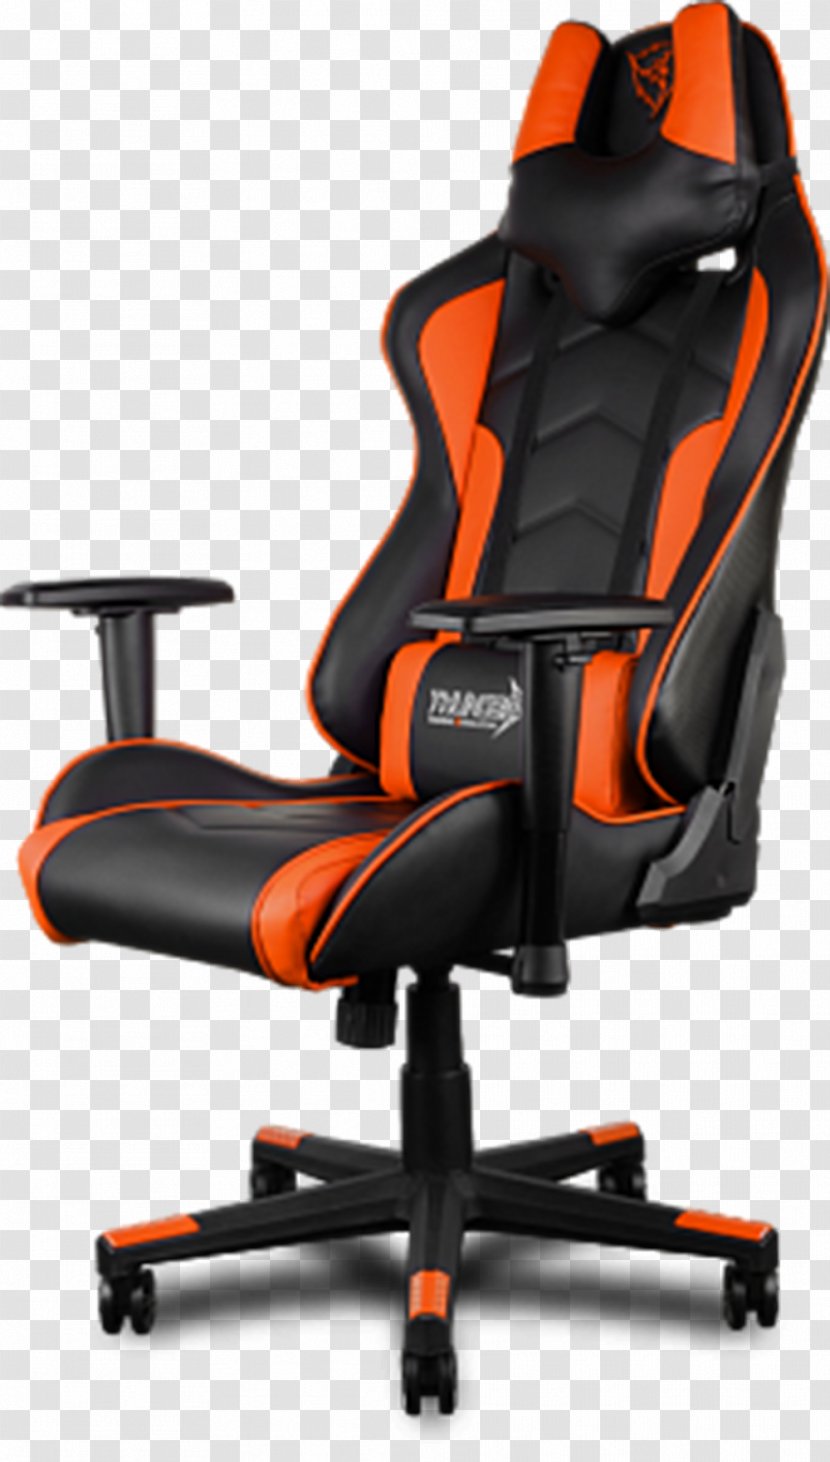 Gaming Chair Video Game Furniture Office & Desk Chairs Transparent PNG